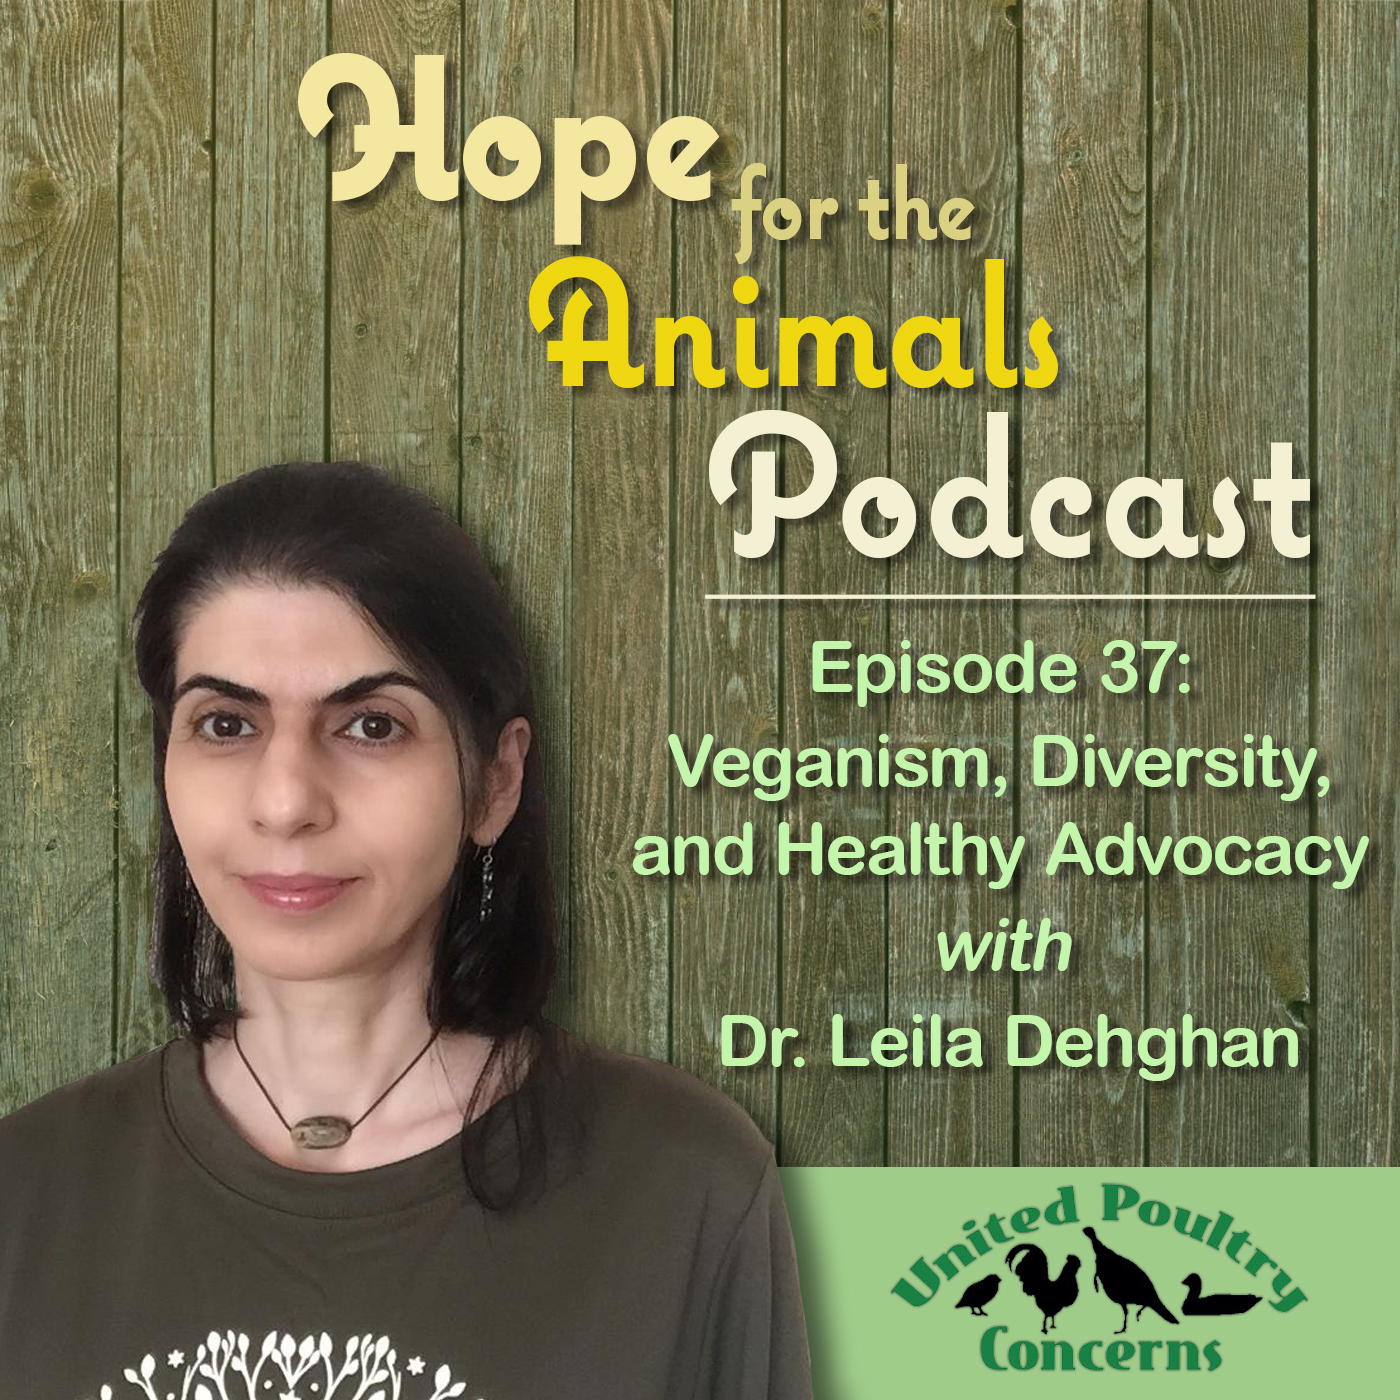 Episode 37: Veganism, Diversity, and Healthy Advocacy with Dr. Leila Dehghan